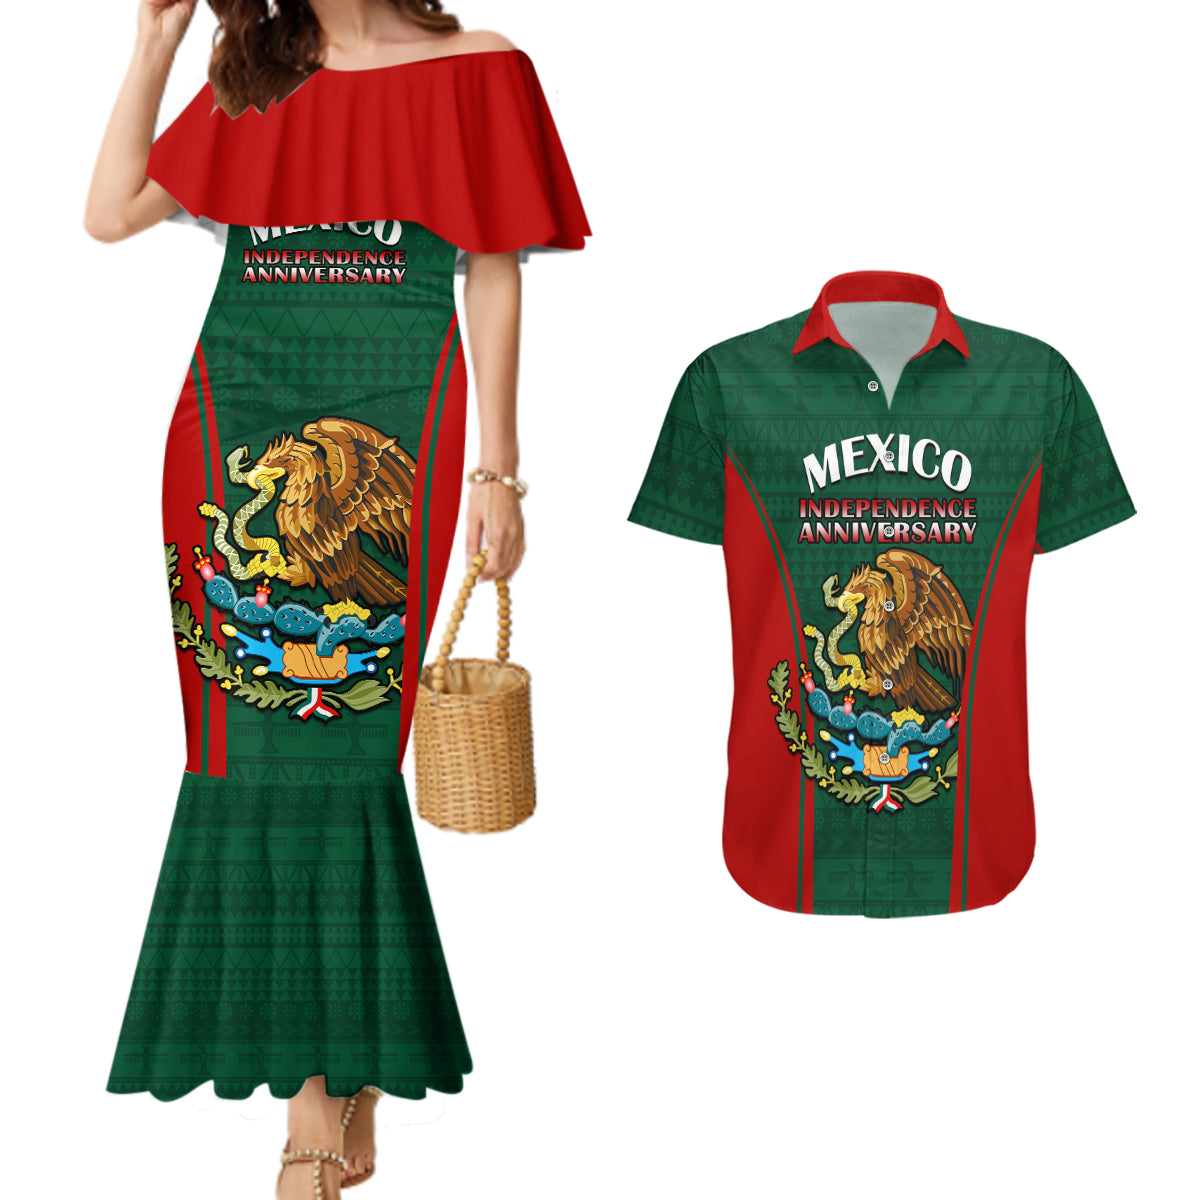 custom-mexico-independence-day-couples-matching-mermaid-dress-and-hawaiian-shirt-happy-213th-anniversary-mexican-proud